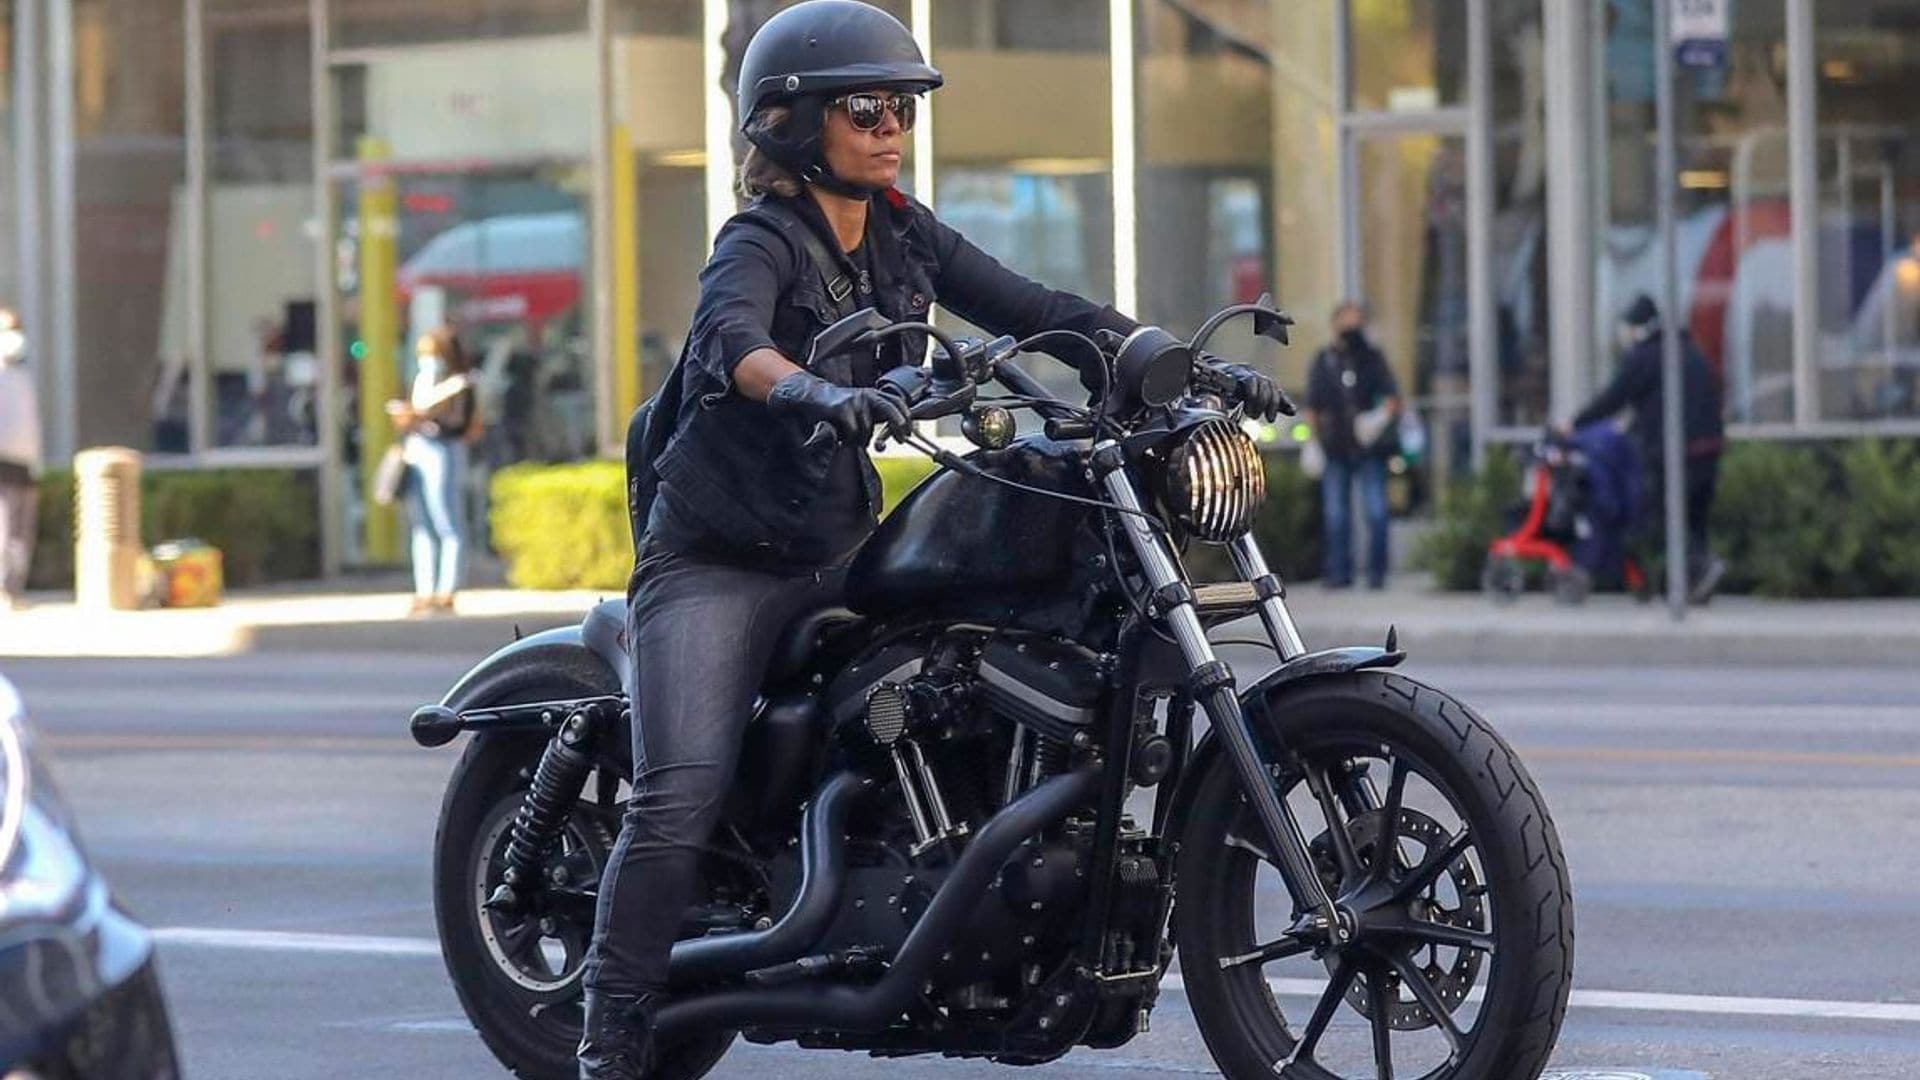 Halle Berry looks biker chic while riding a Harley Davidson motorcycle